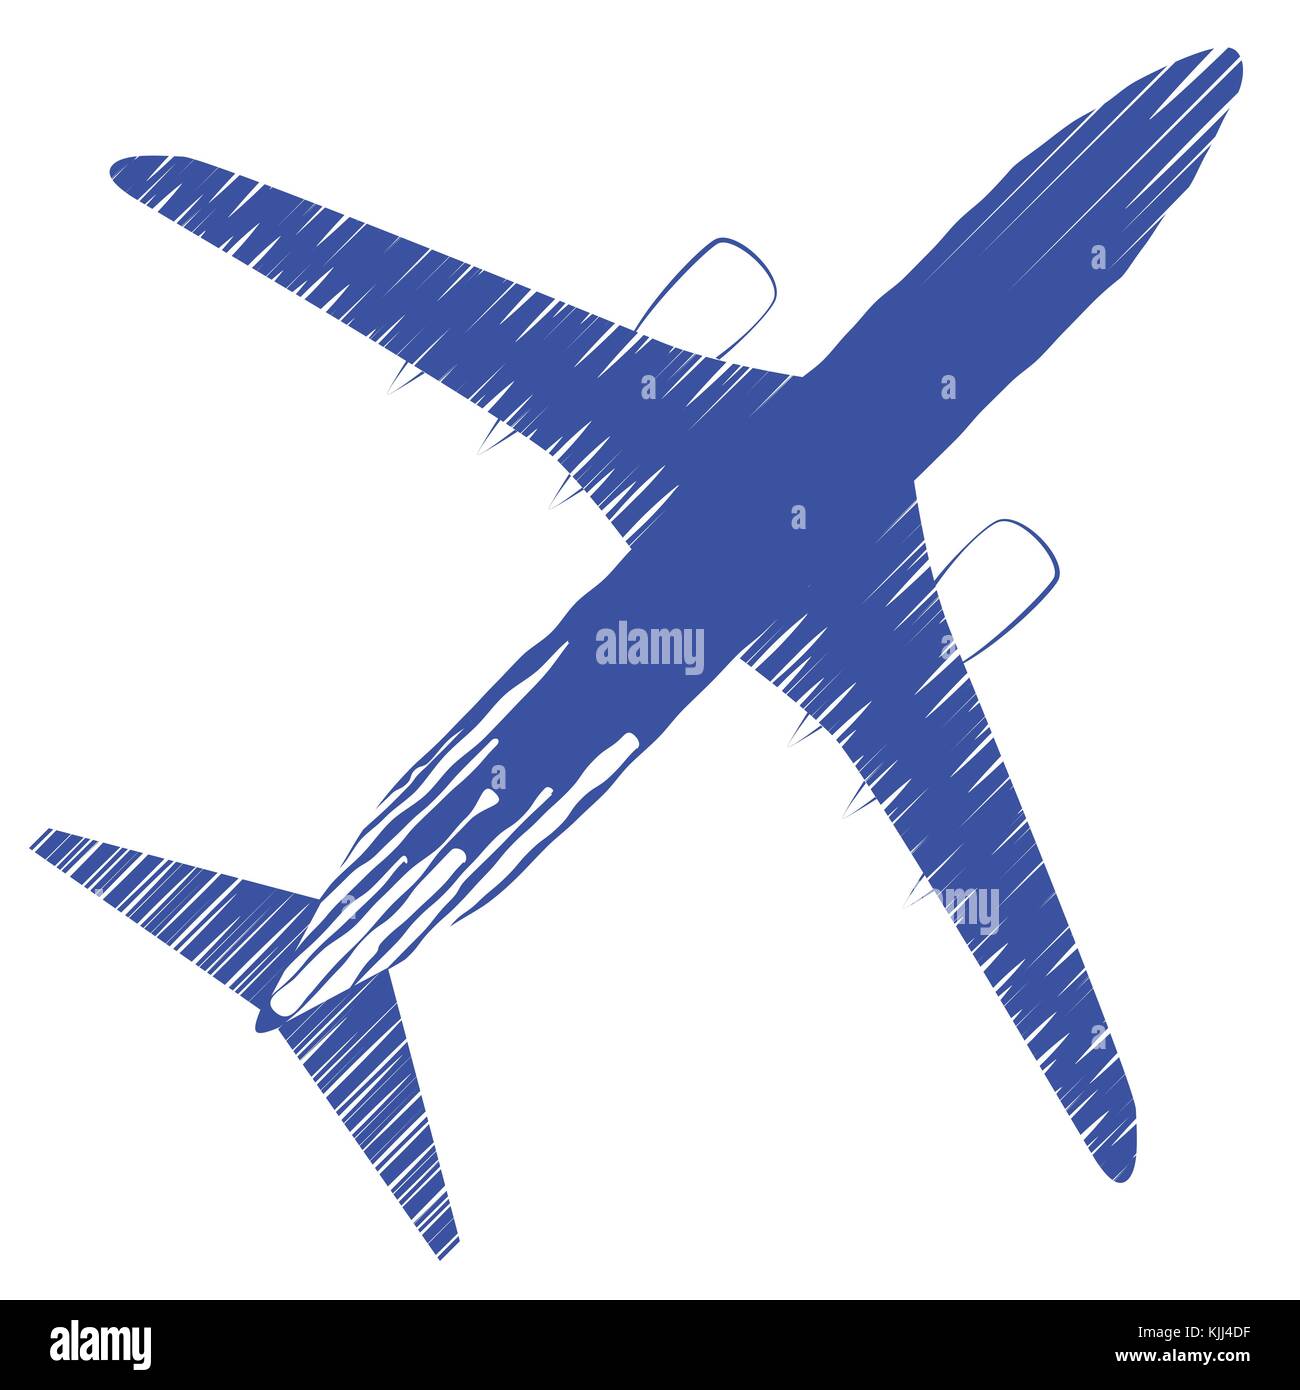 Airplane top view. Vector illustration airplane. Airline Concept Travel Passenger plane. Icon of Jet commercial airplane isolated on a white background. Stock Vector